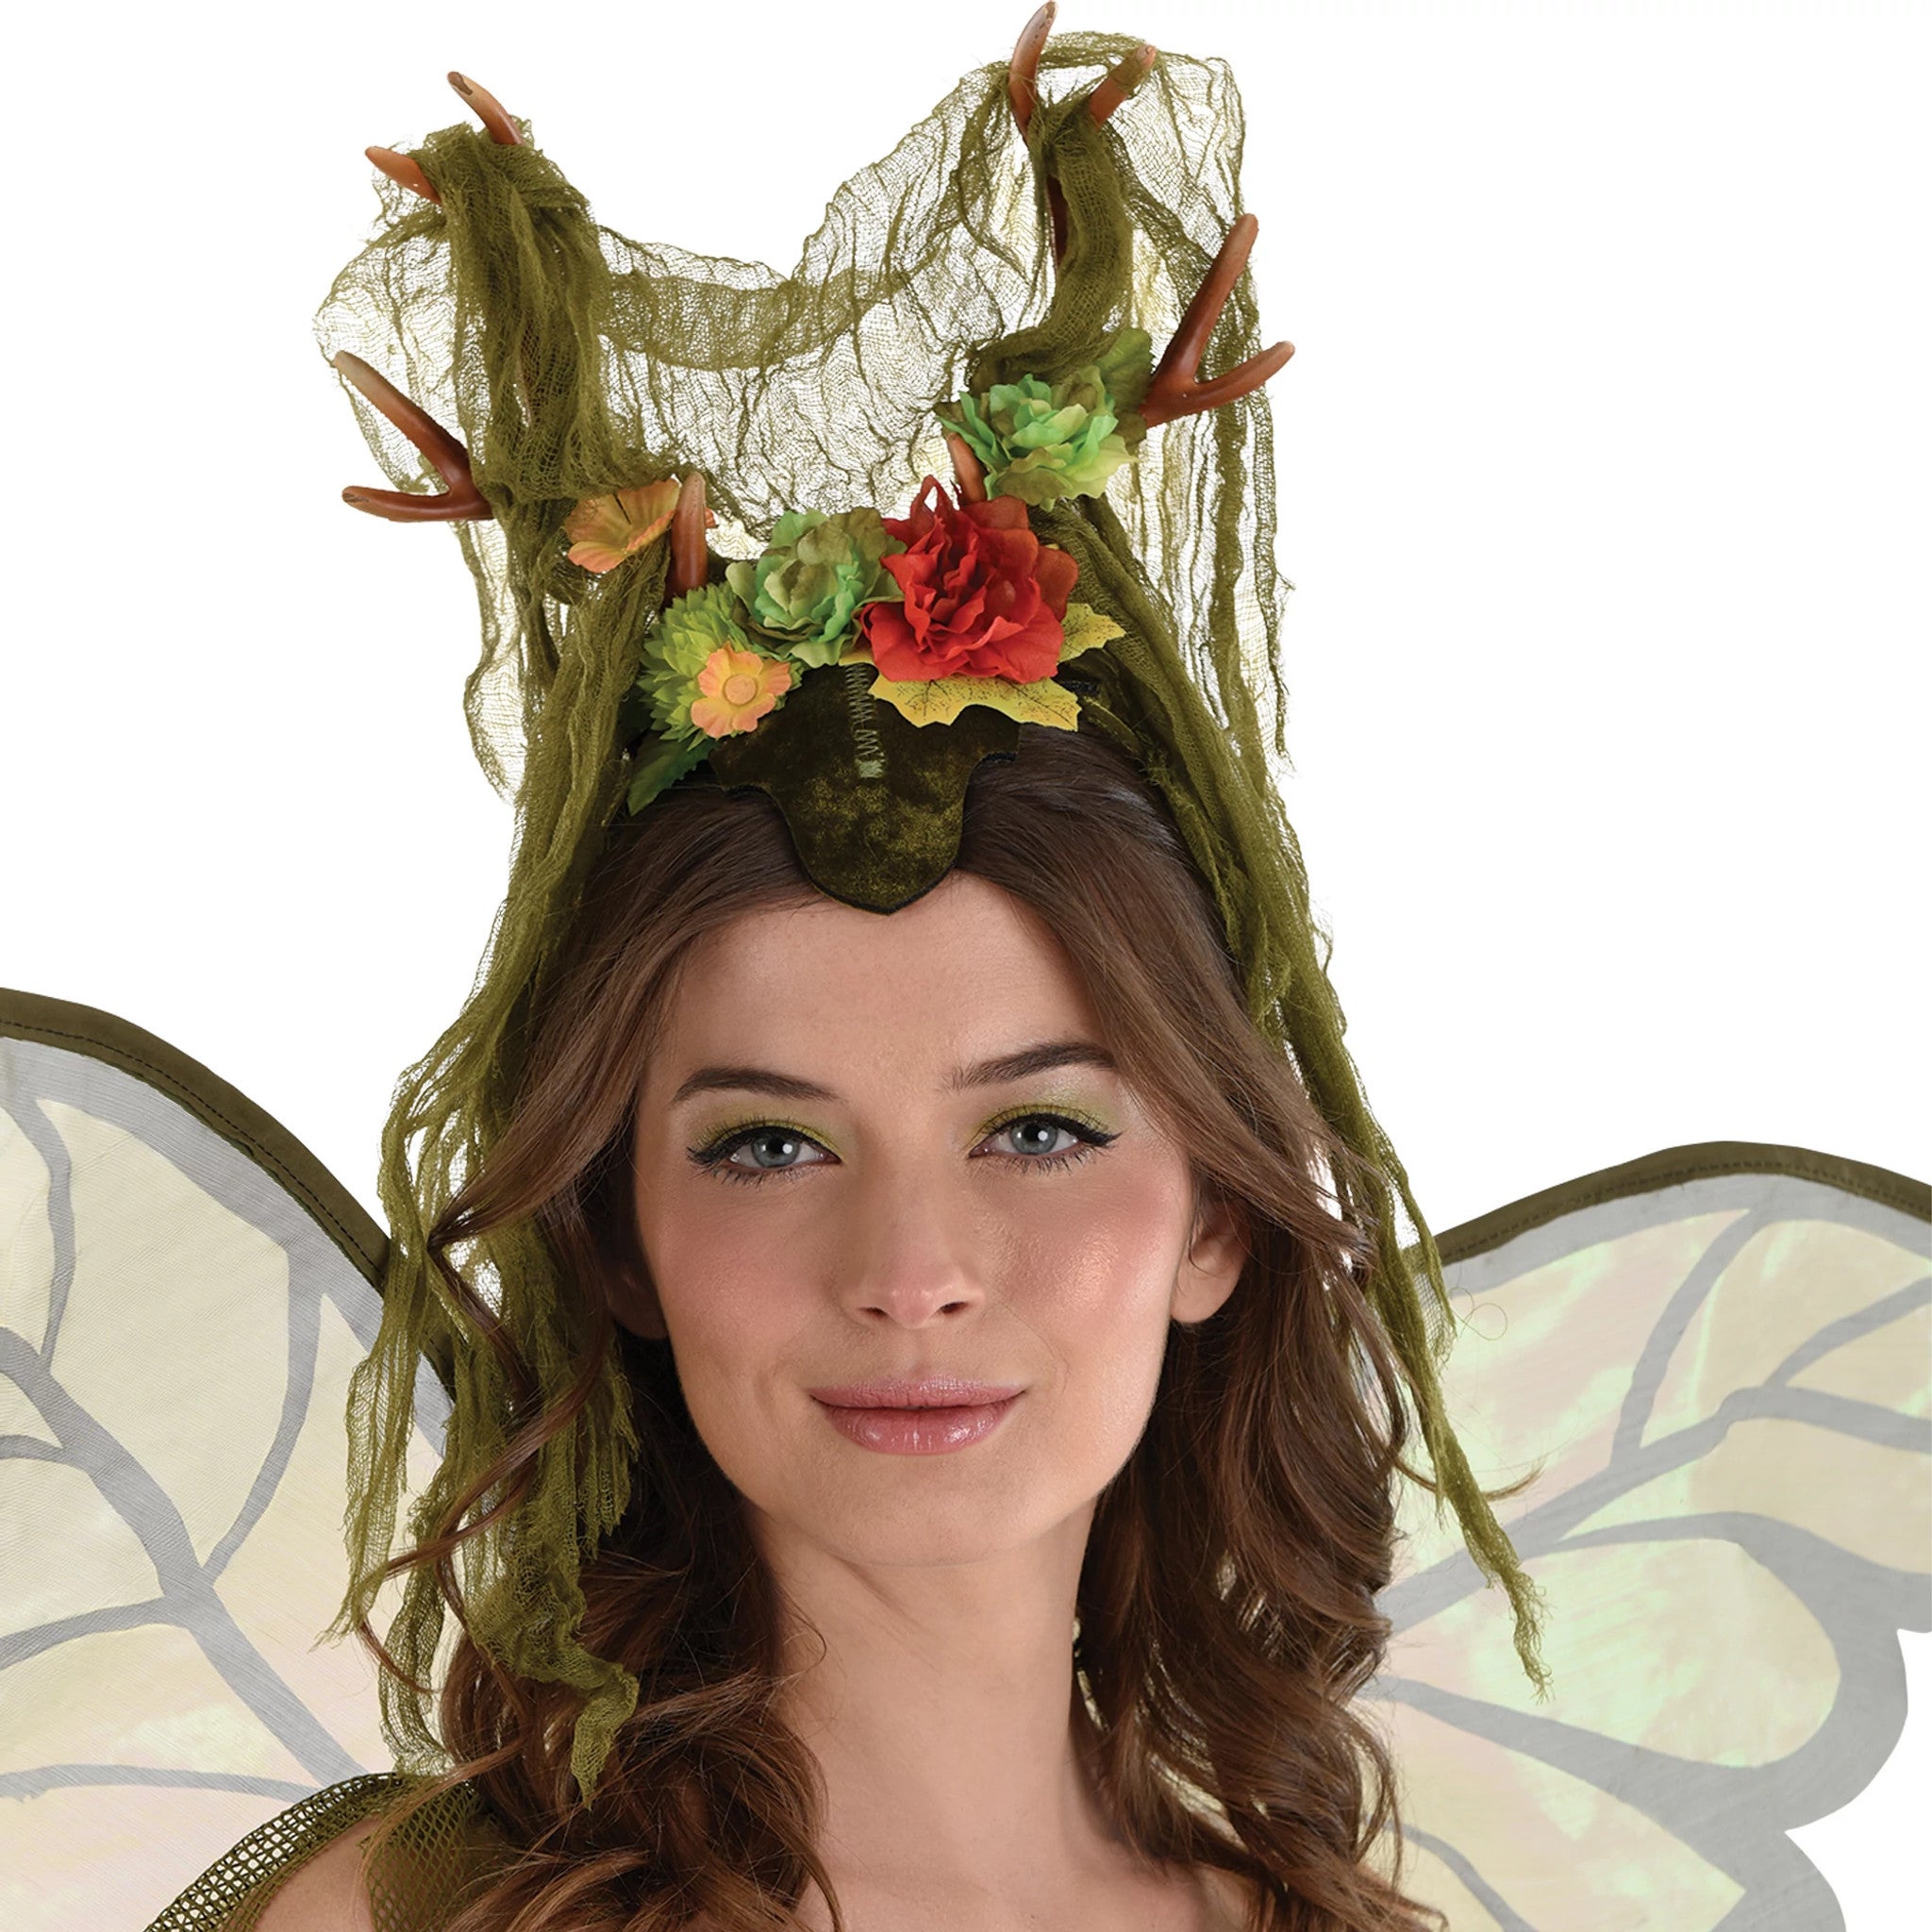 A woodland headpiece with flowers and vines